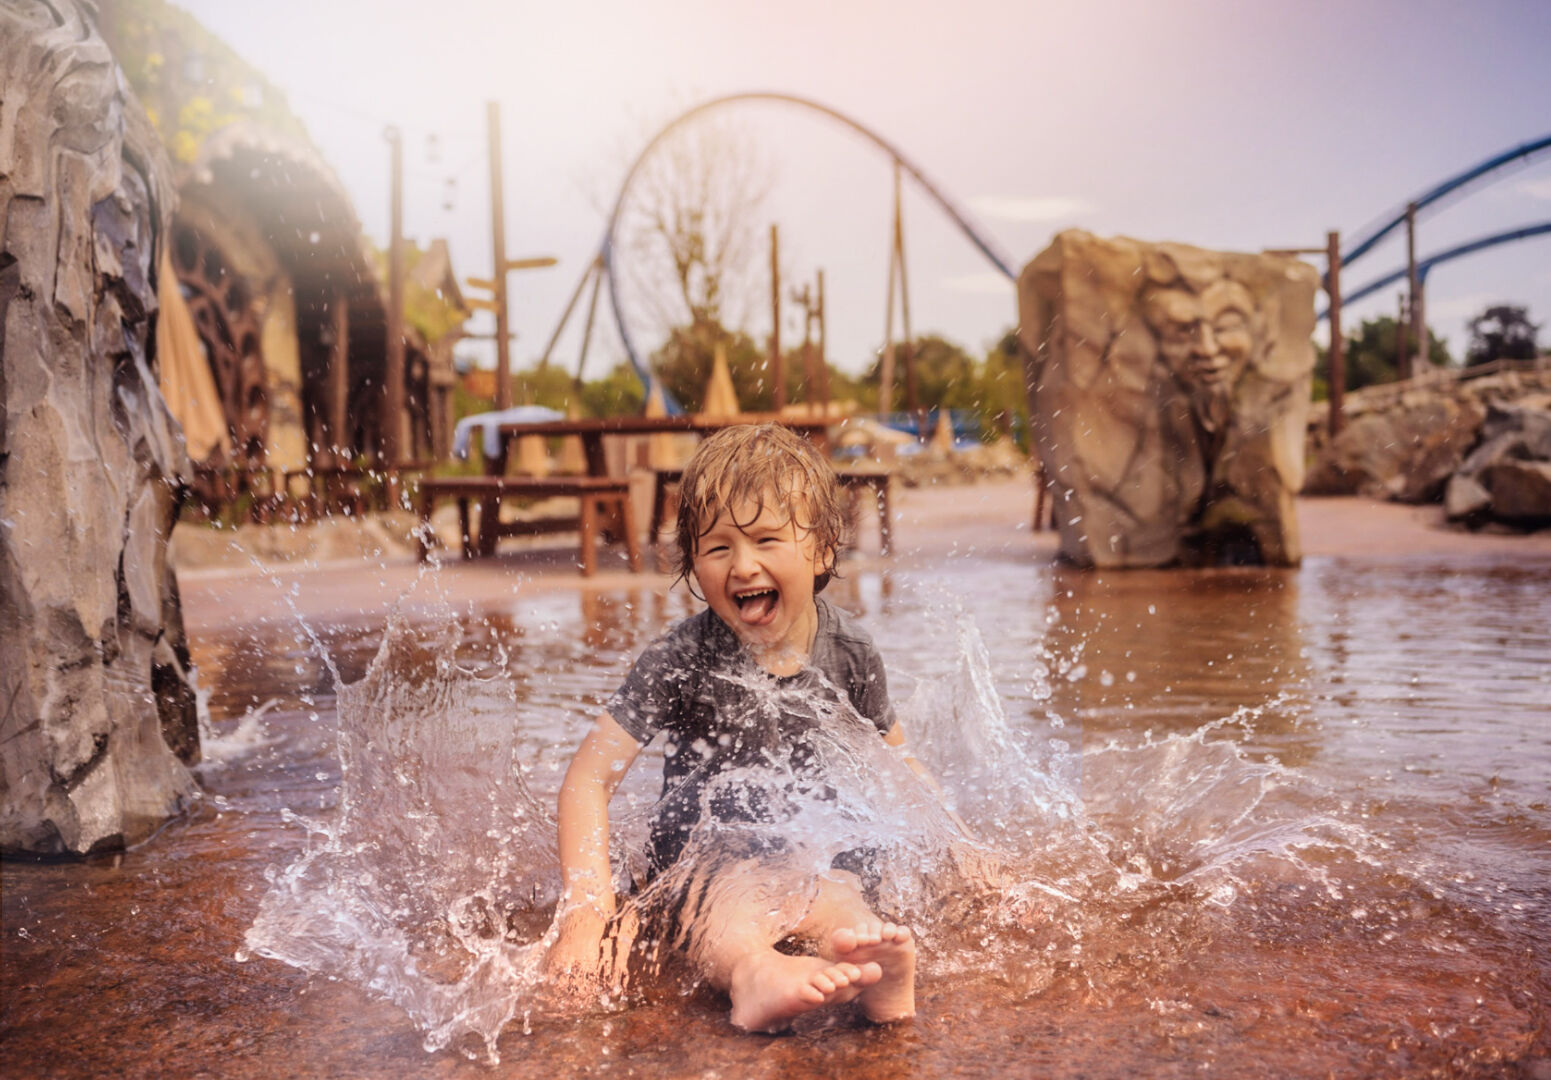 Sponsored – Let yourself be enchanted: in this theme park, children (and parents) imagine themselves in a magical world